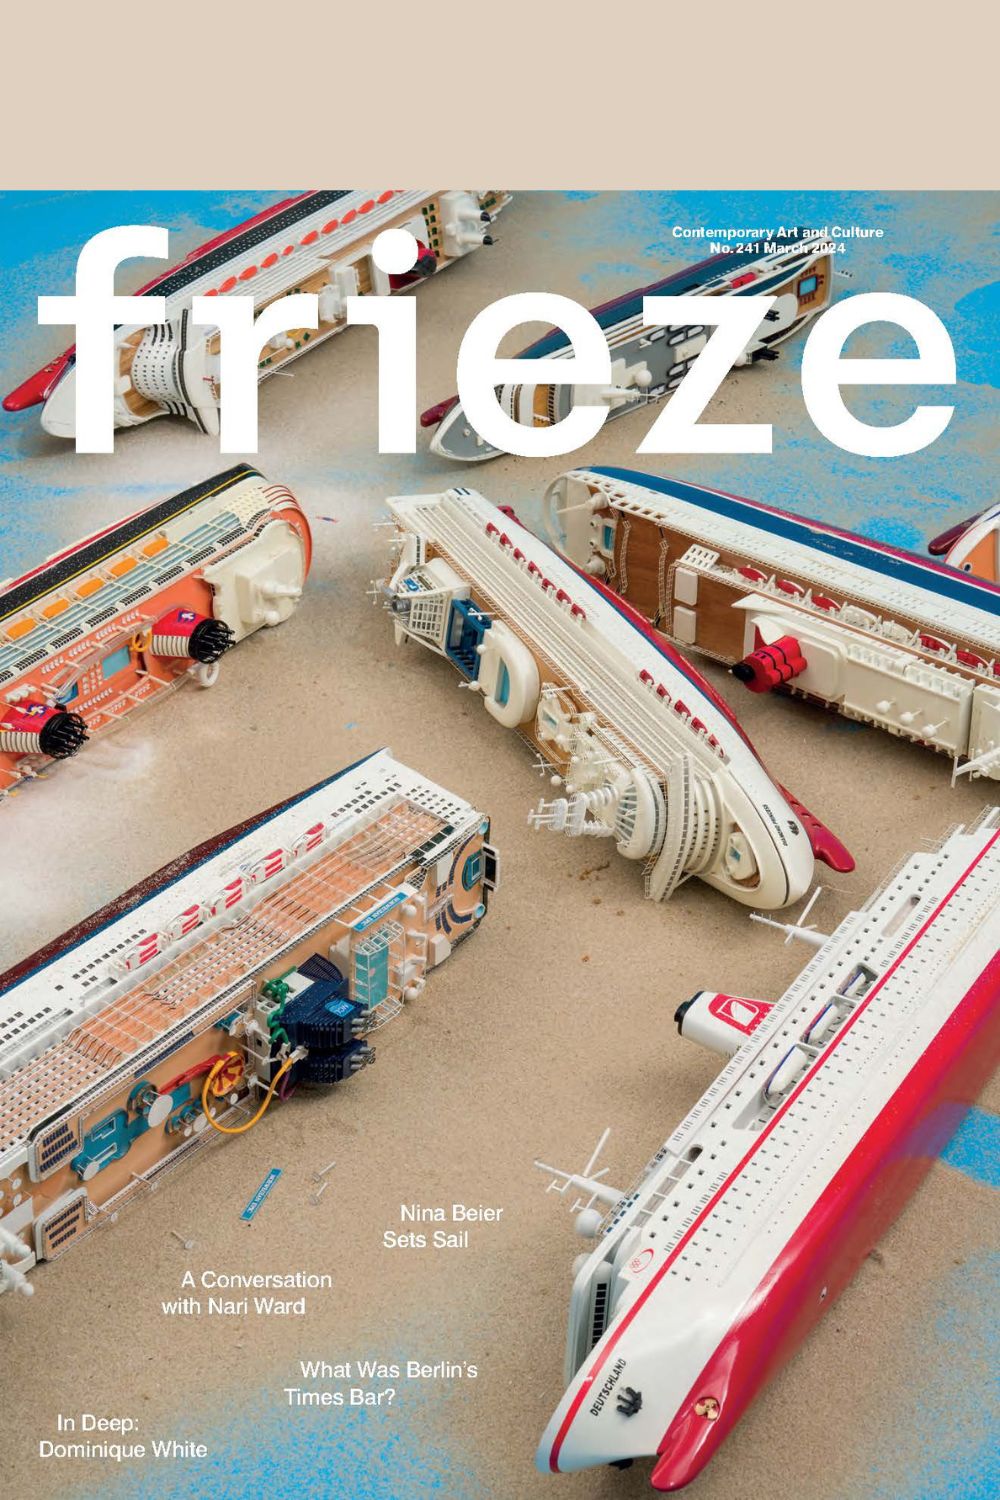 Frieze Issue 241 cover featuring artwork by Nina Beier (cruise ships on their sides)